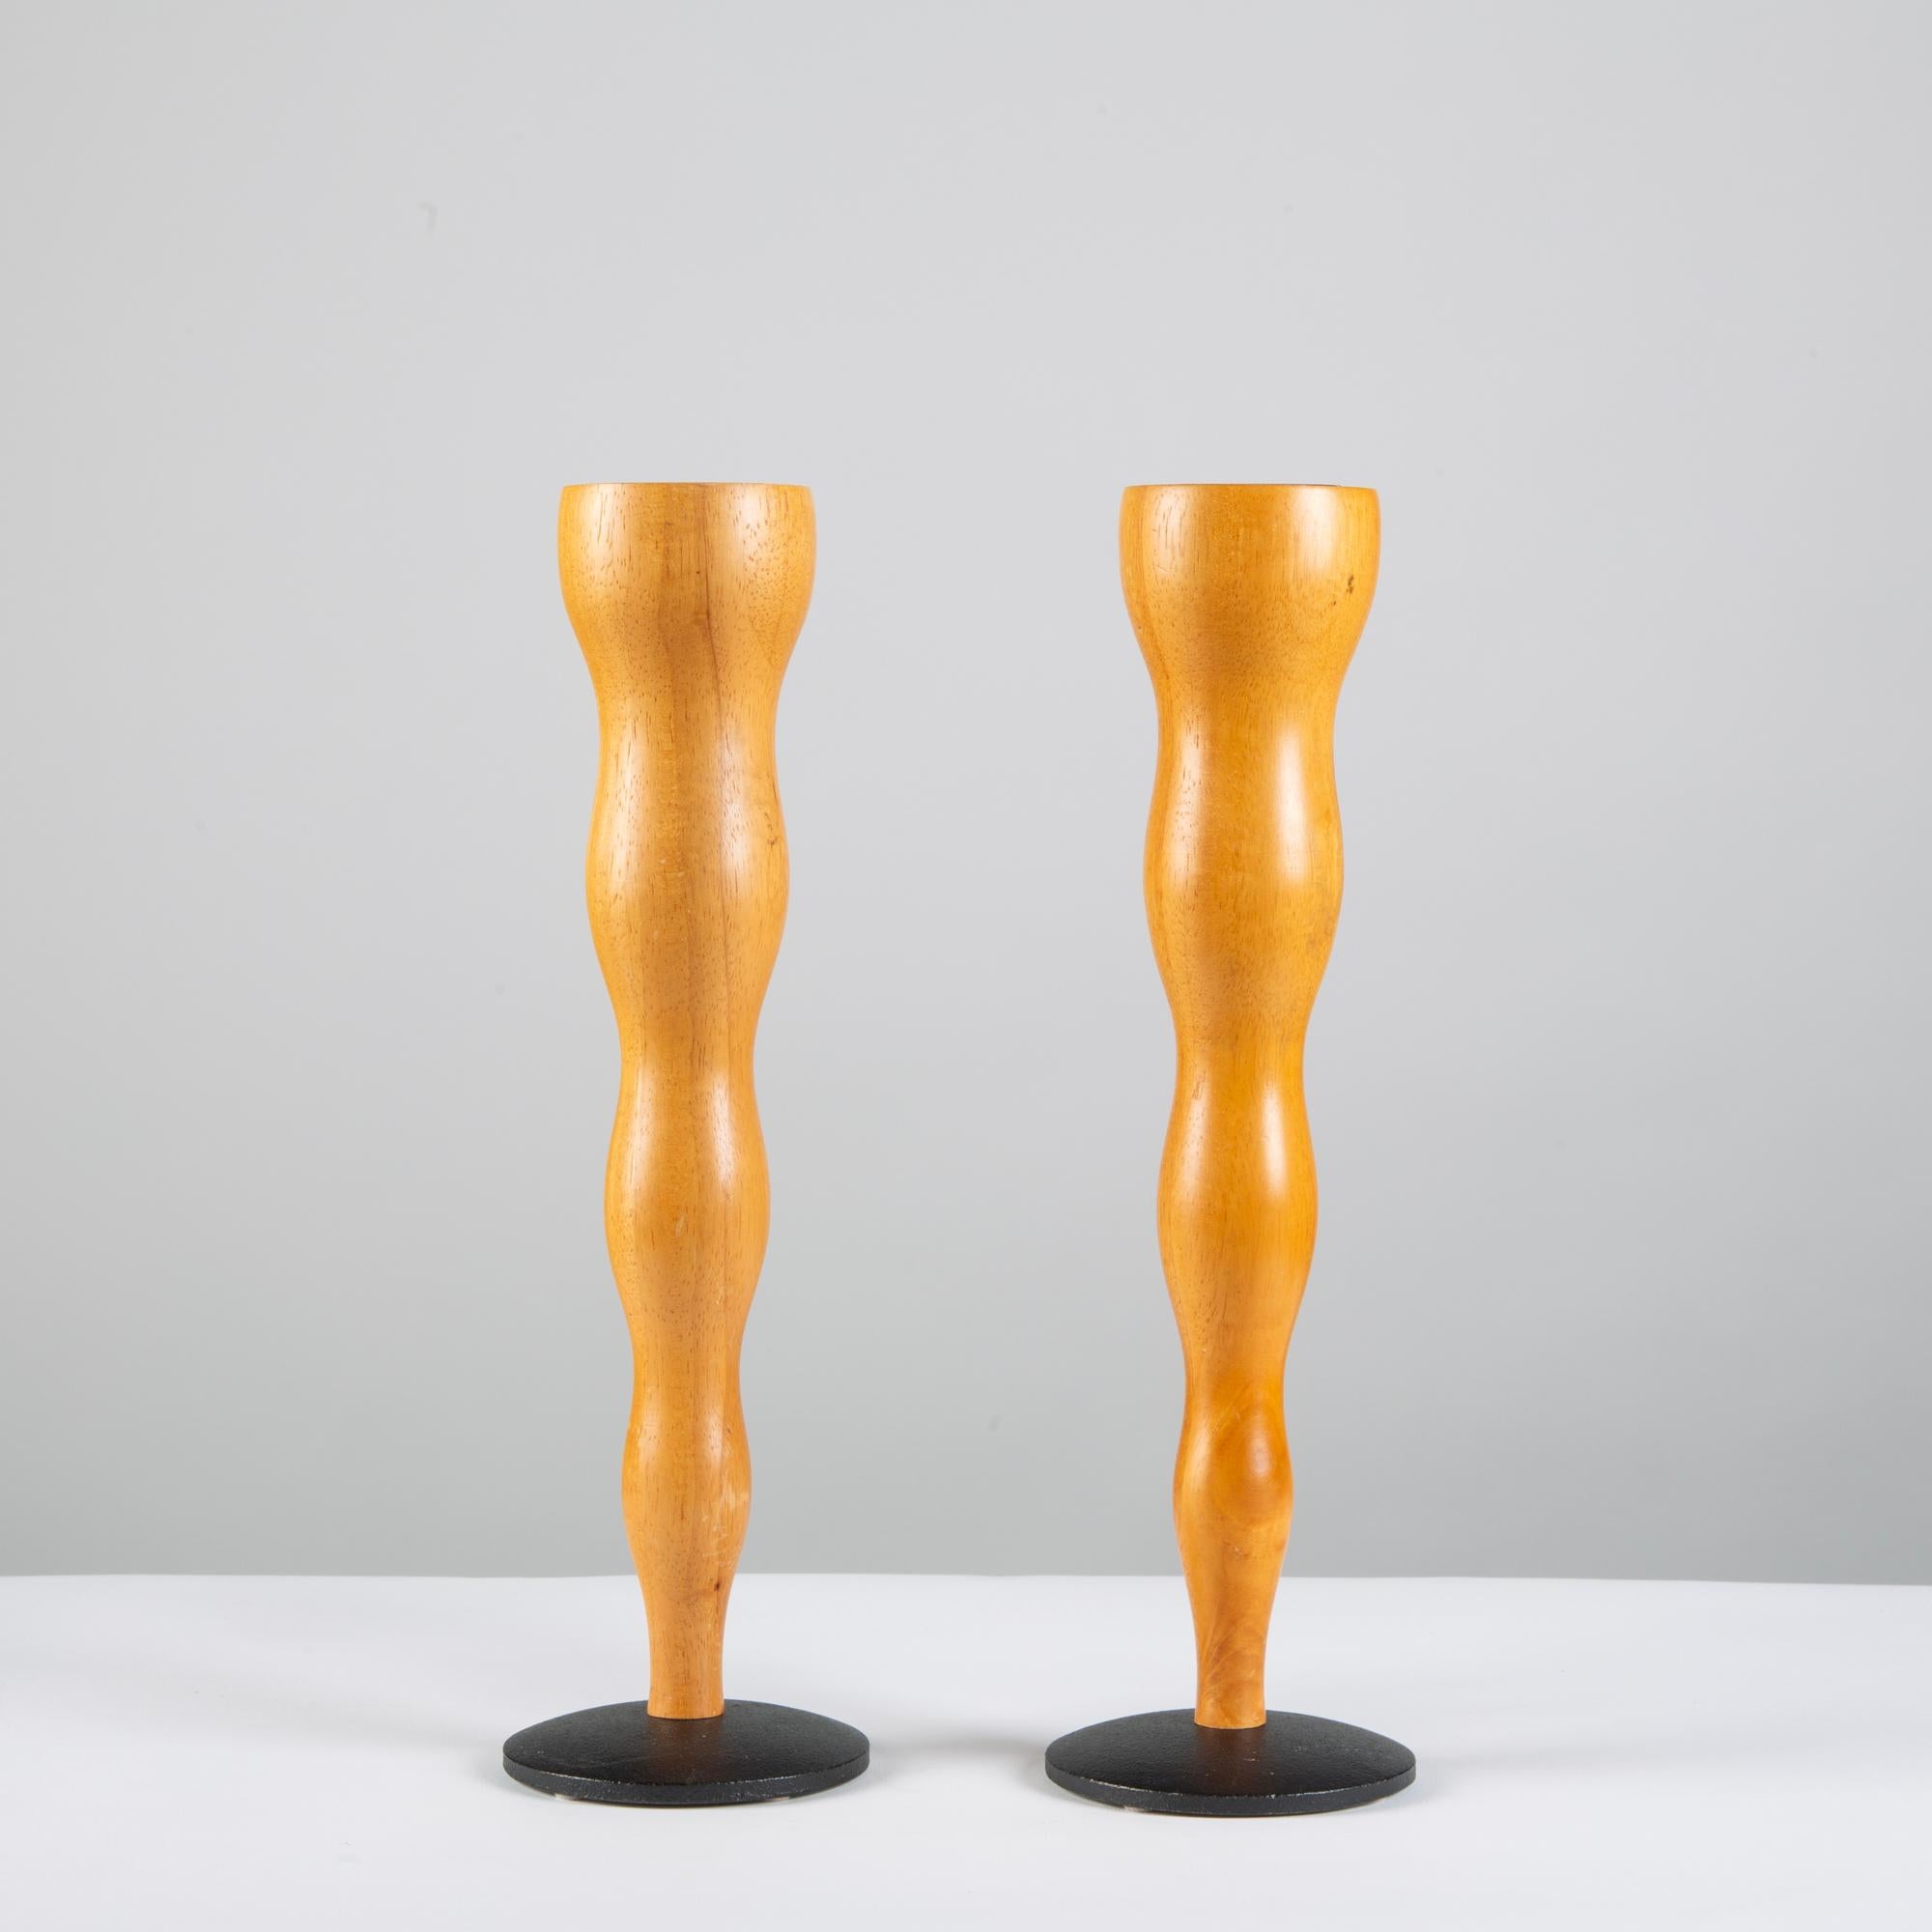 Pair of maple candlesticks, by Mikael Björnstjerna for Boda Nova c.1960s, Sweden. The pair of beautifully hand sculpted candlesticks have a round black metal base.

Marked - Boda Nova Sweden Mikael Björnstjerna on the underside

Dimensions: 4.75